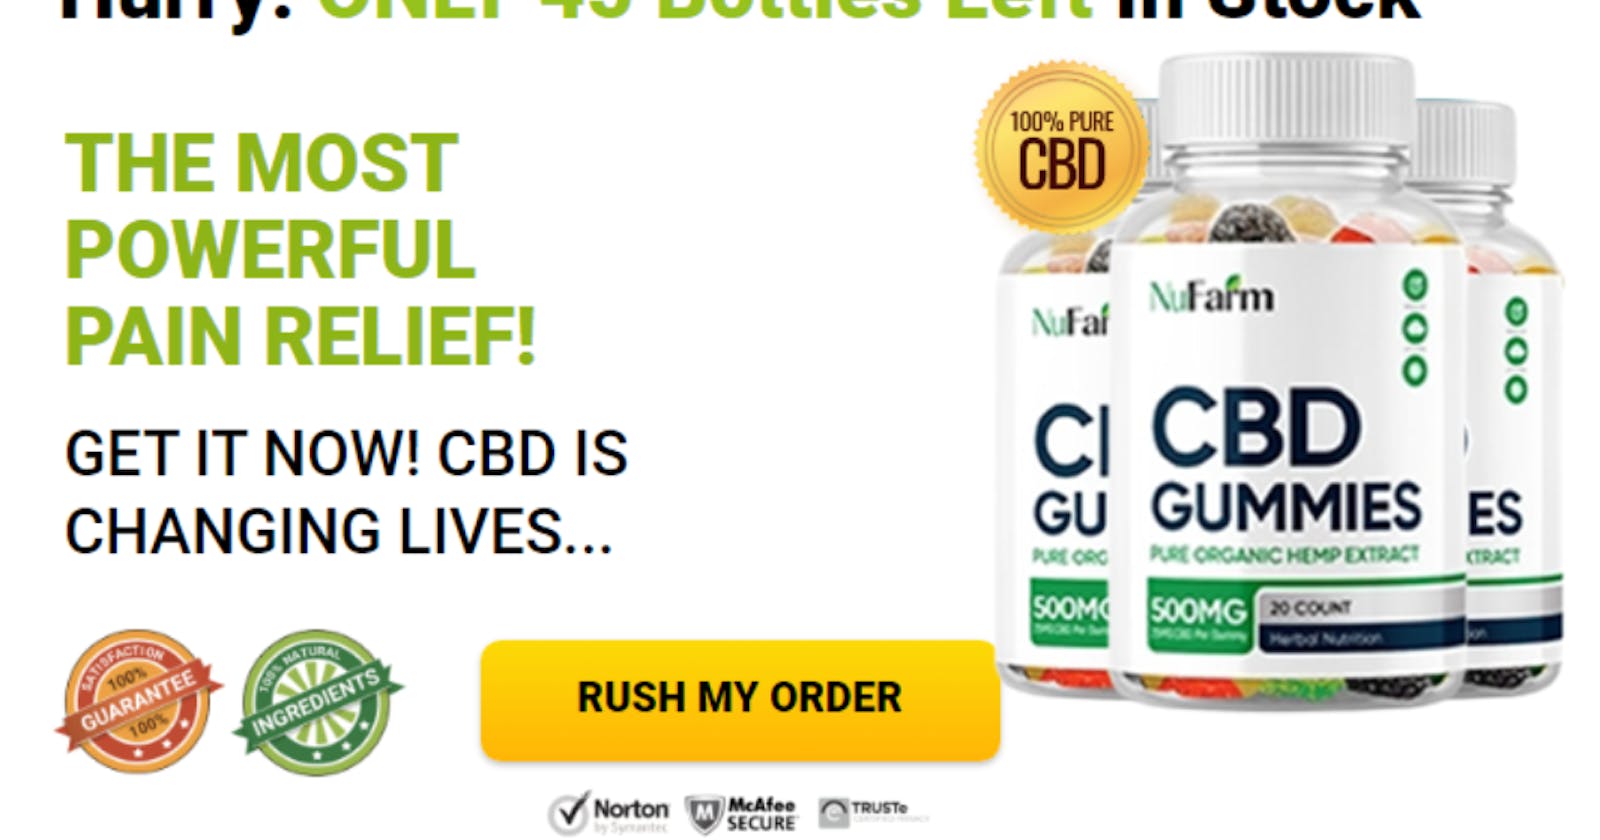 Nufarm CBD Gummies Supplement Is It Really Effective Product Good For You, Where To Buy 2023!